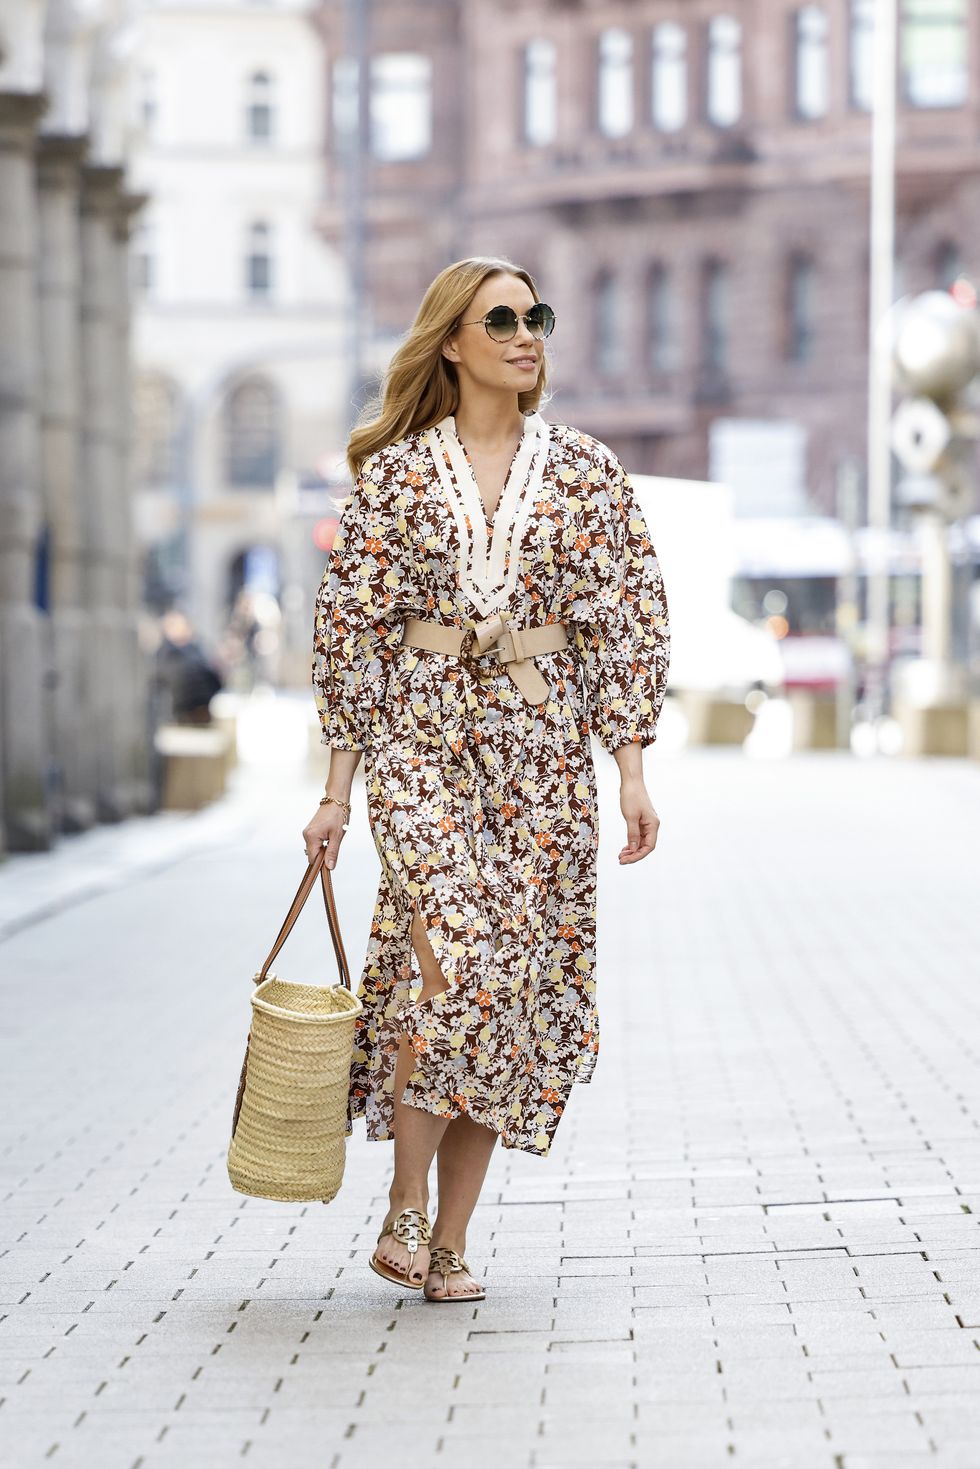 hamburg, germany   march 29 german actress lara isabelle rentinck wearing sunglasses by chloe, a long multicolored maxi dress with floral print by tory burch, a dark brown and beige bast bag by tory burch and gold sandals by tory burch during a street style shooting on march 29, 2021 in hamburg, germany photo by streetstyleshootersgetty images